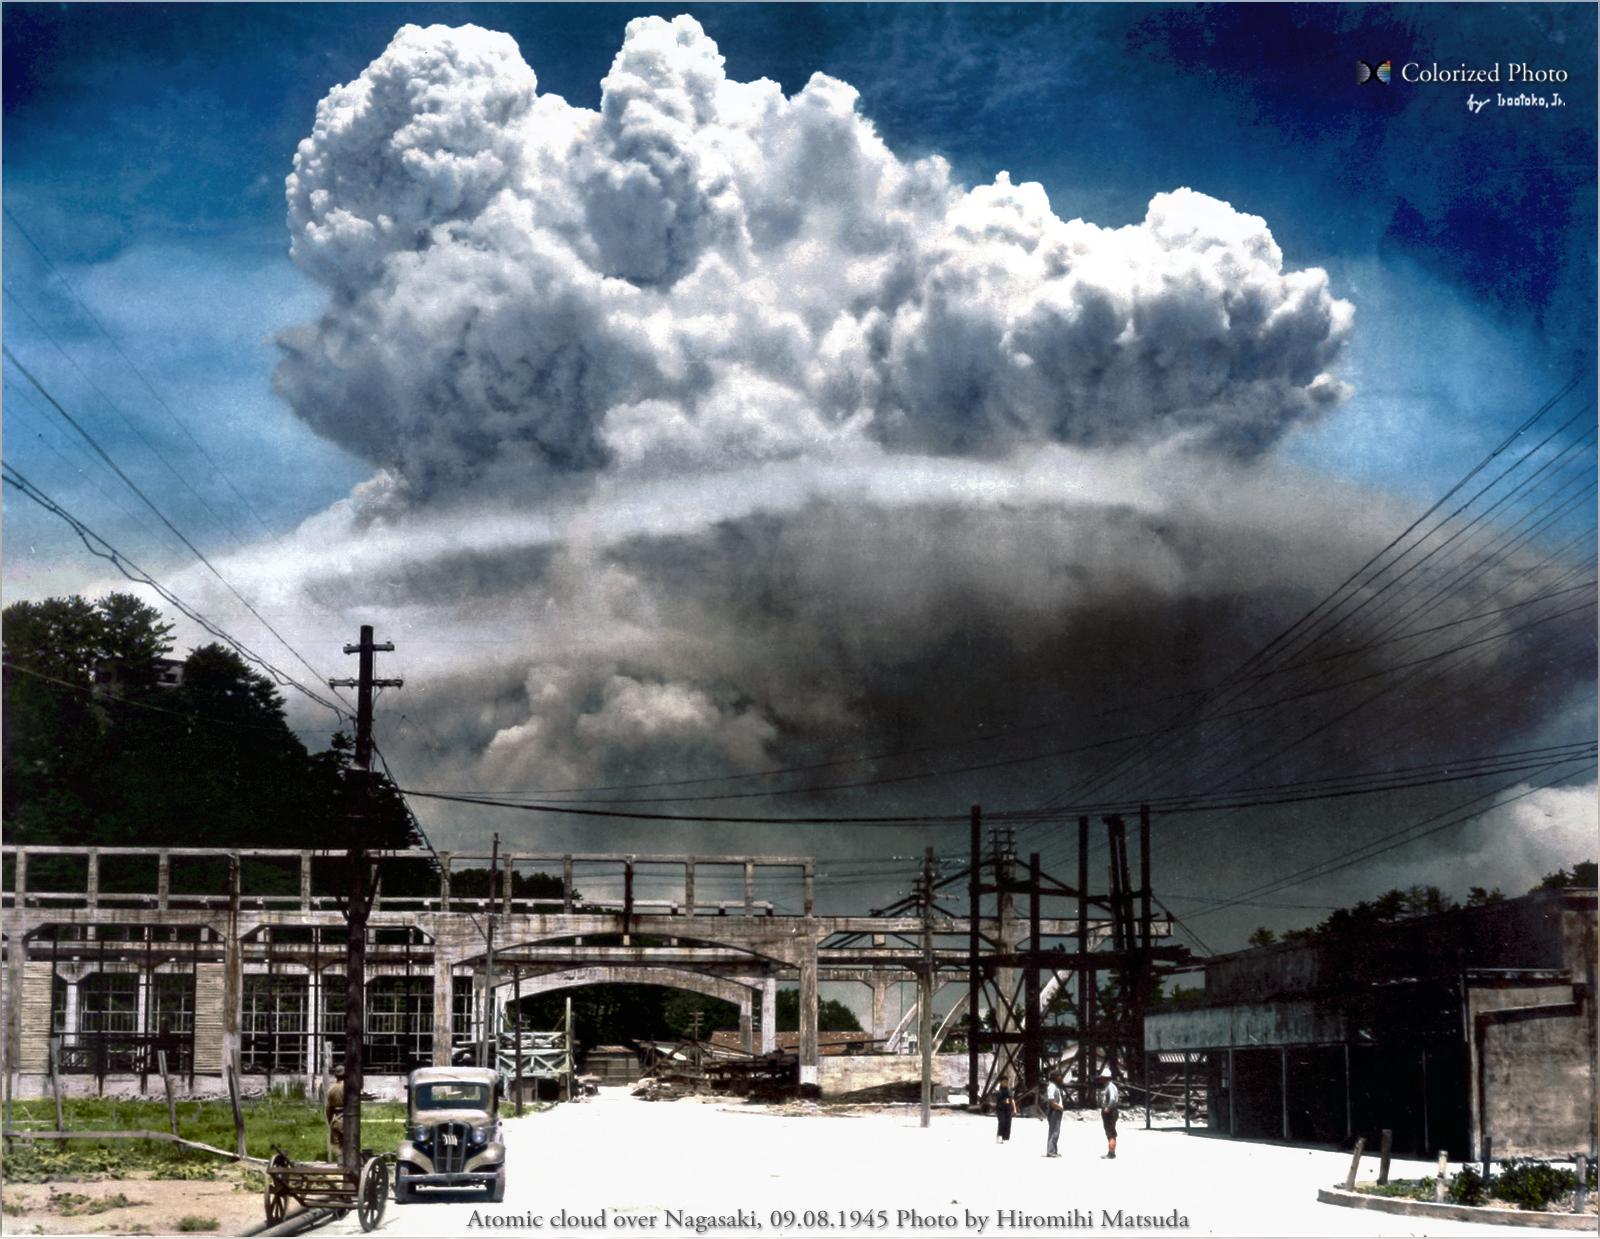 Atomic cloud over Nagasaki, Sept 8,1945, taken 15+ minutes after the explosion, seen from a distance of 15 km. Photo by Hiromihi Matsuda